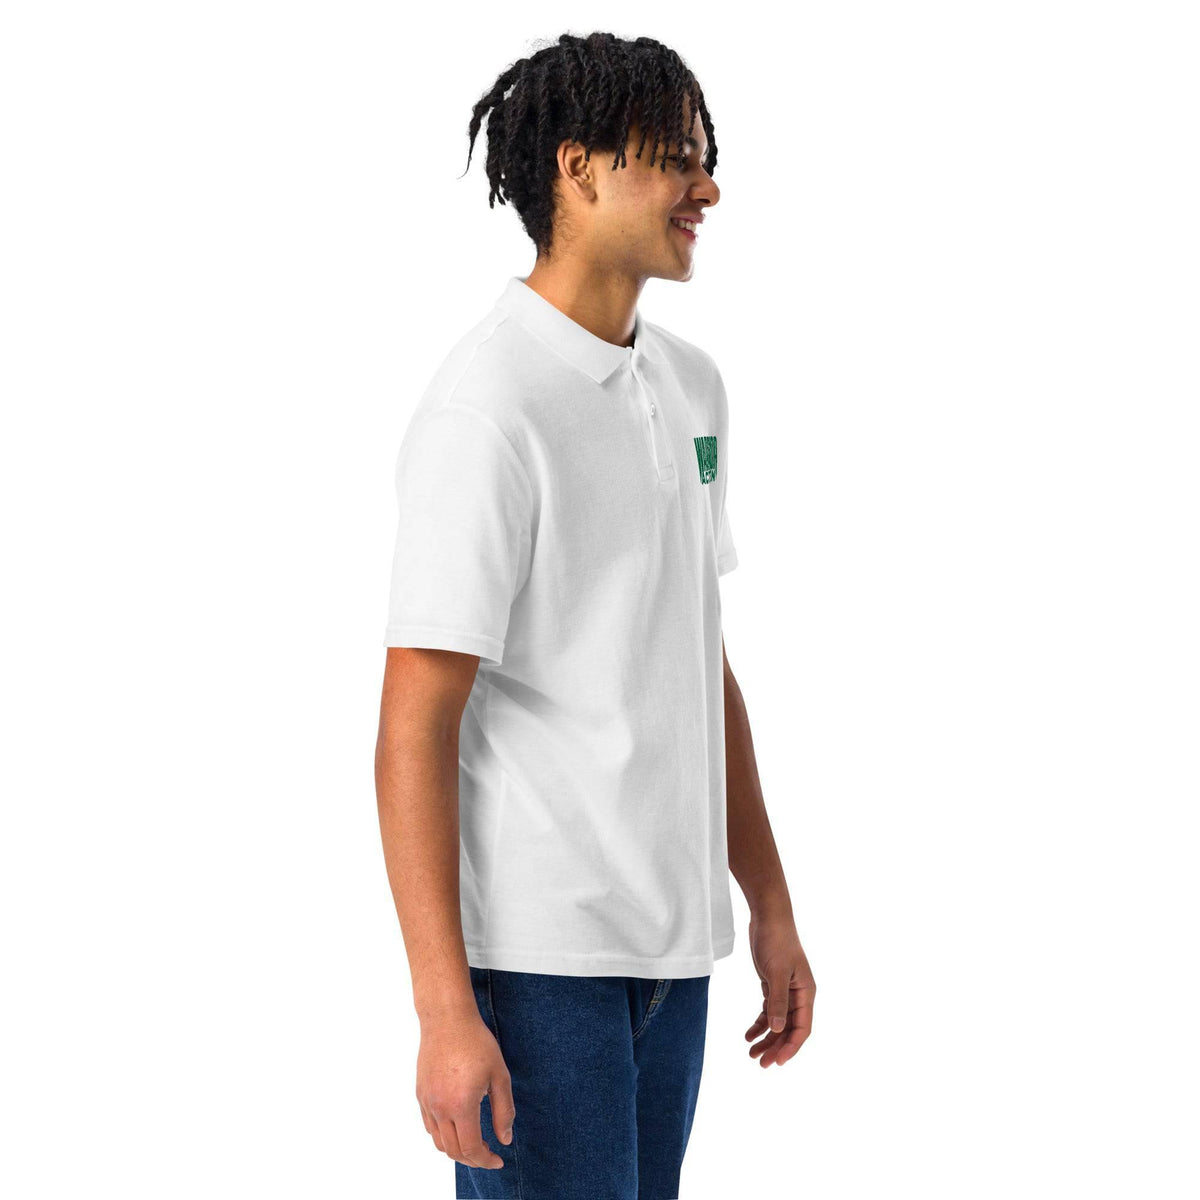 Upgrade Your Look with Warrior Action Polo Shirt: Classic Style and Comfort